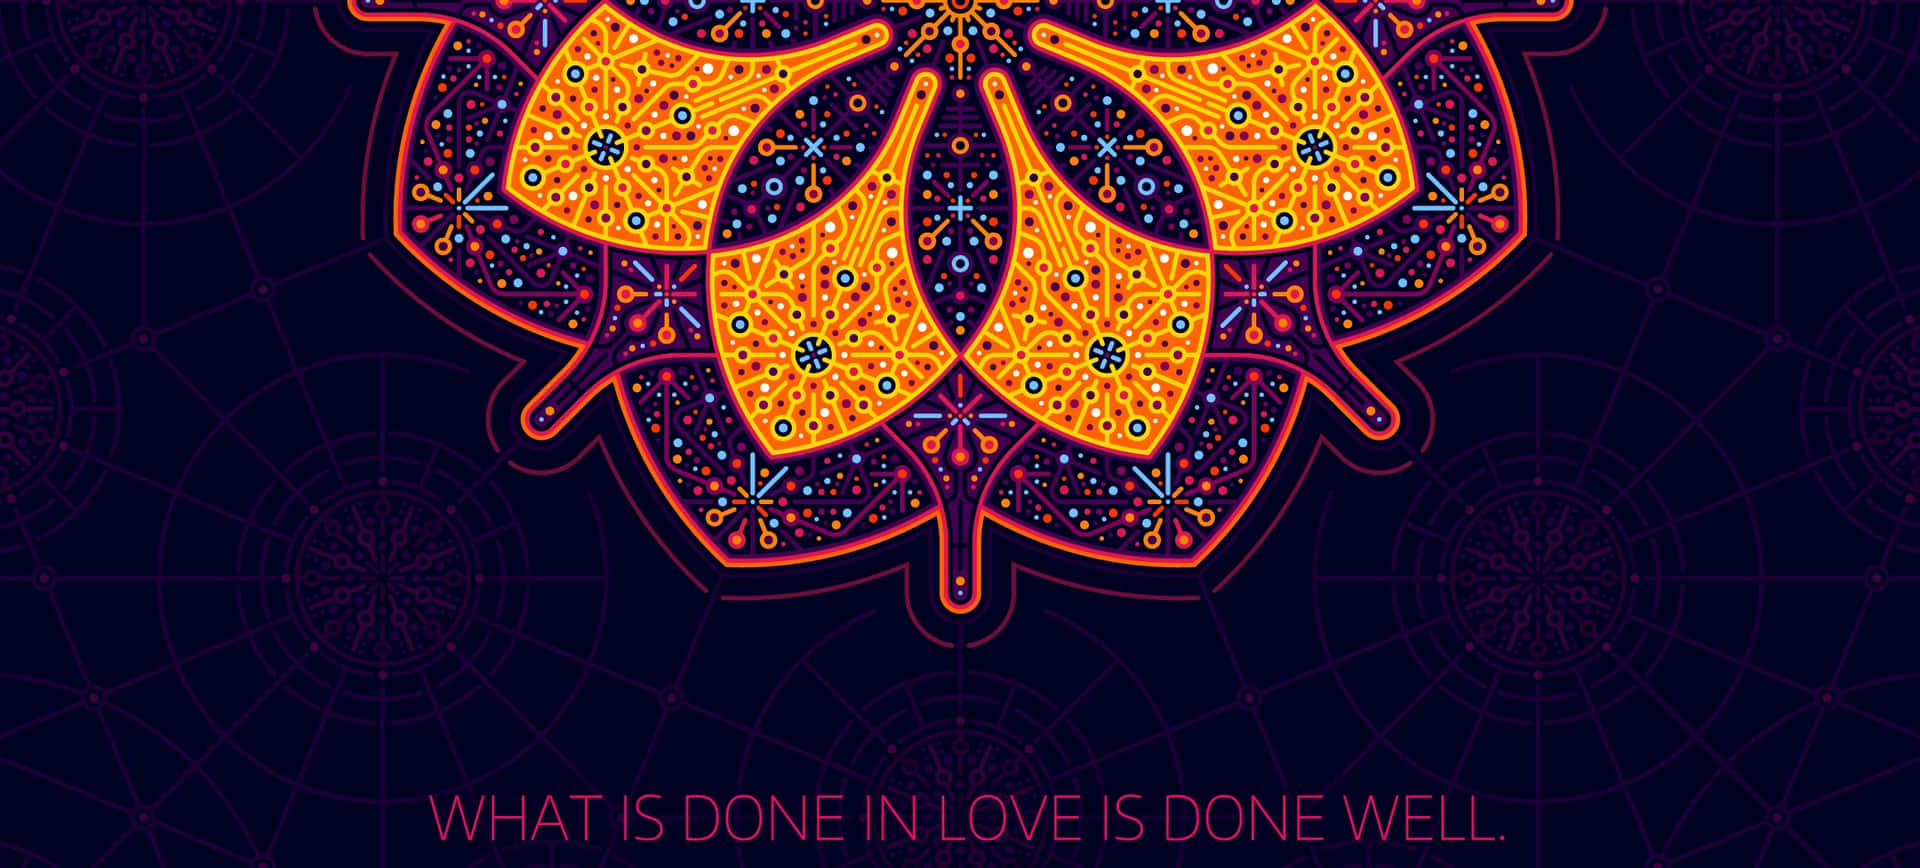 Love Well Done Art Quote Wallpaper